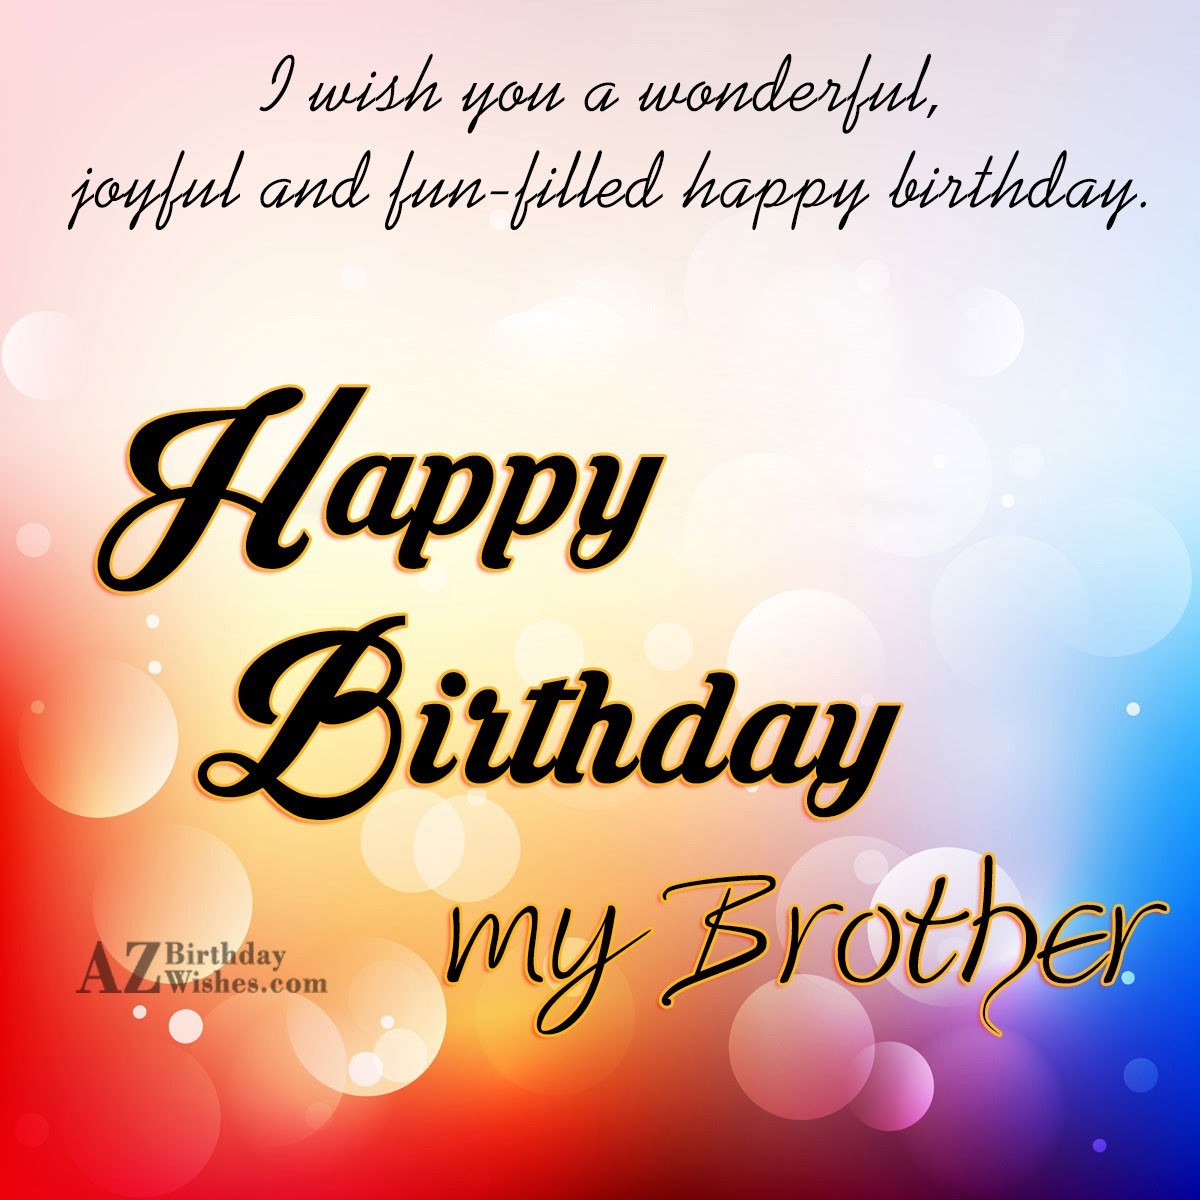 Birthday wishes for deceased brother